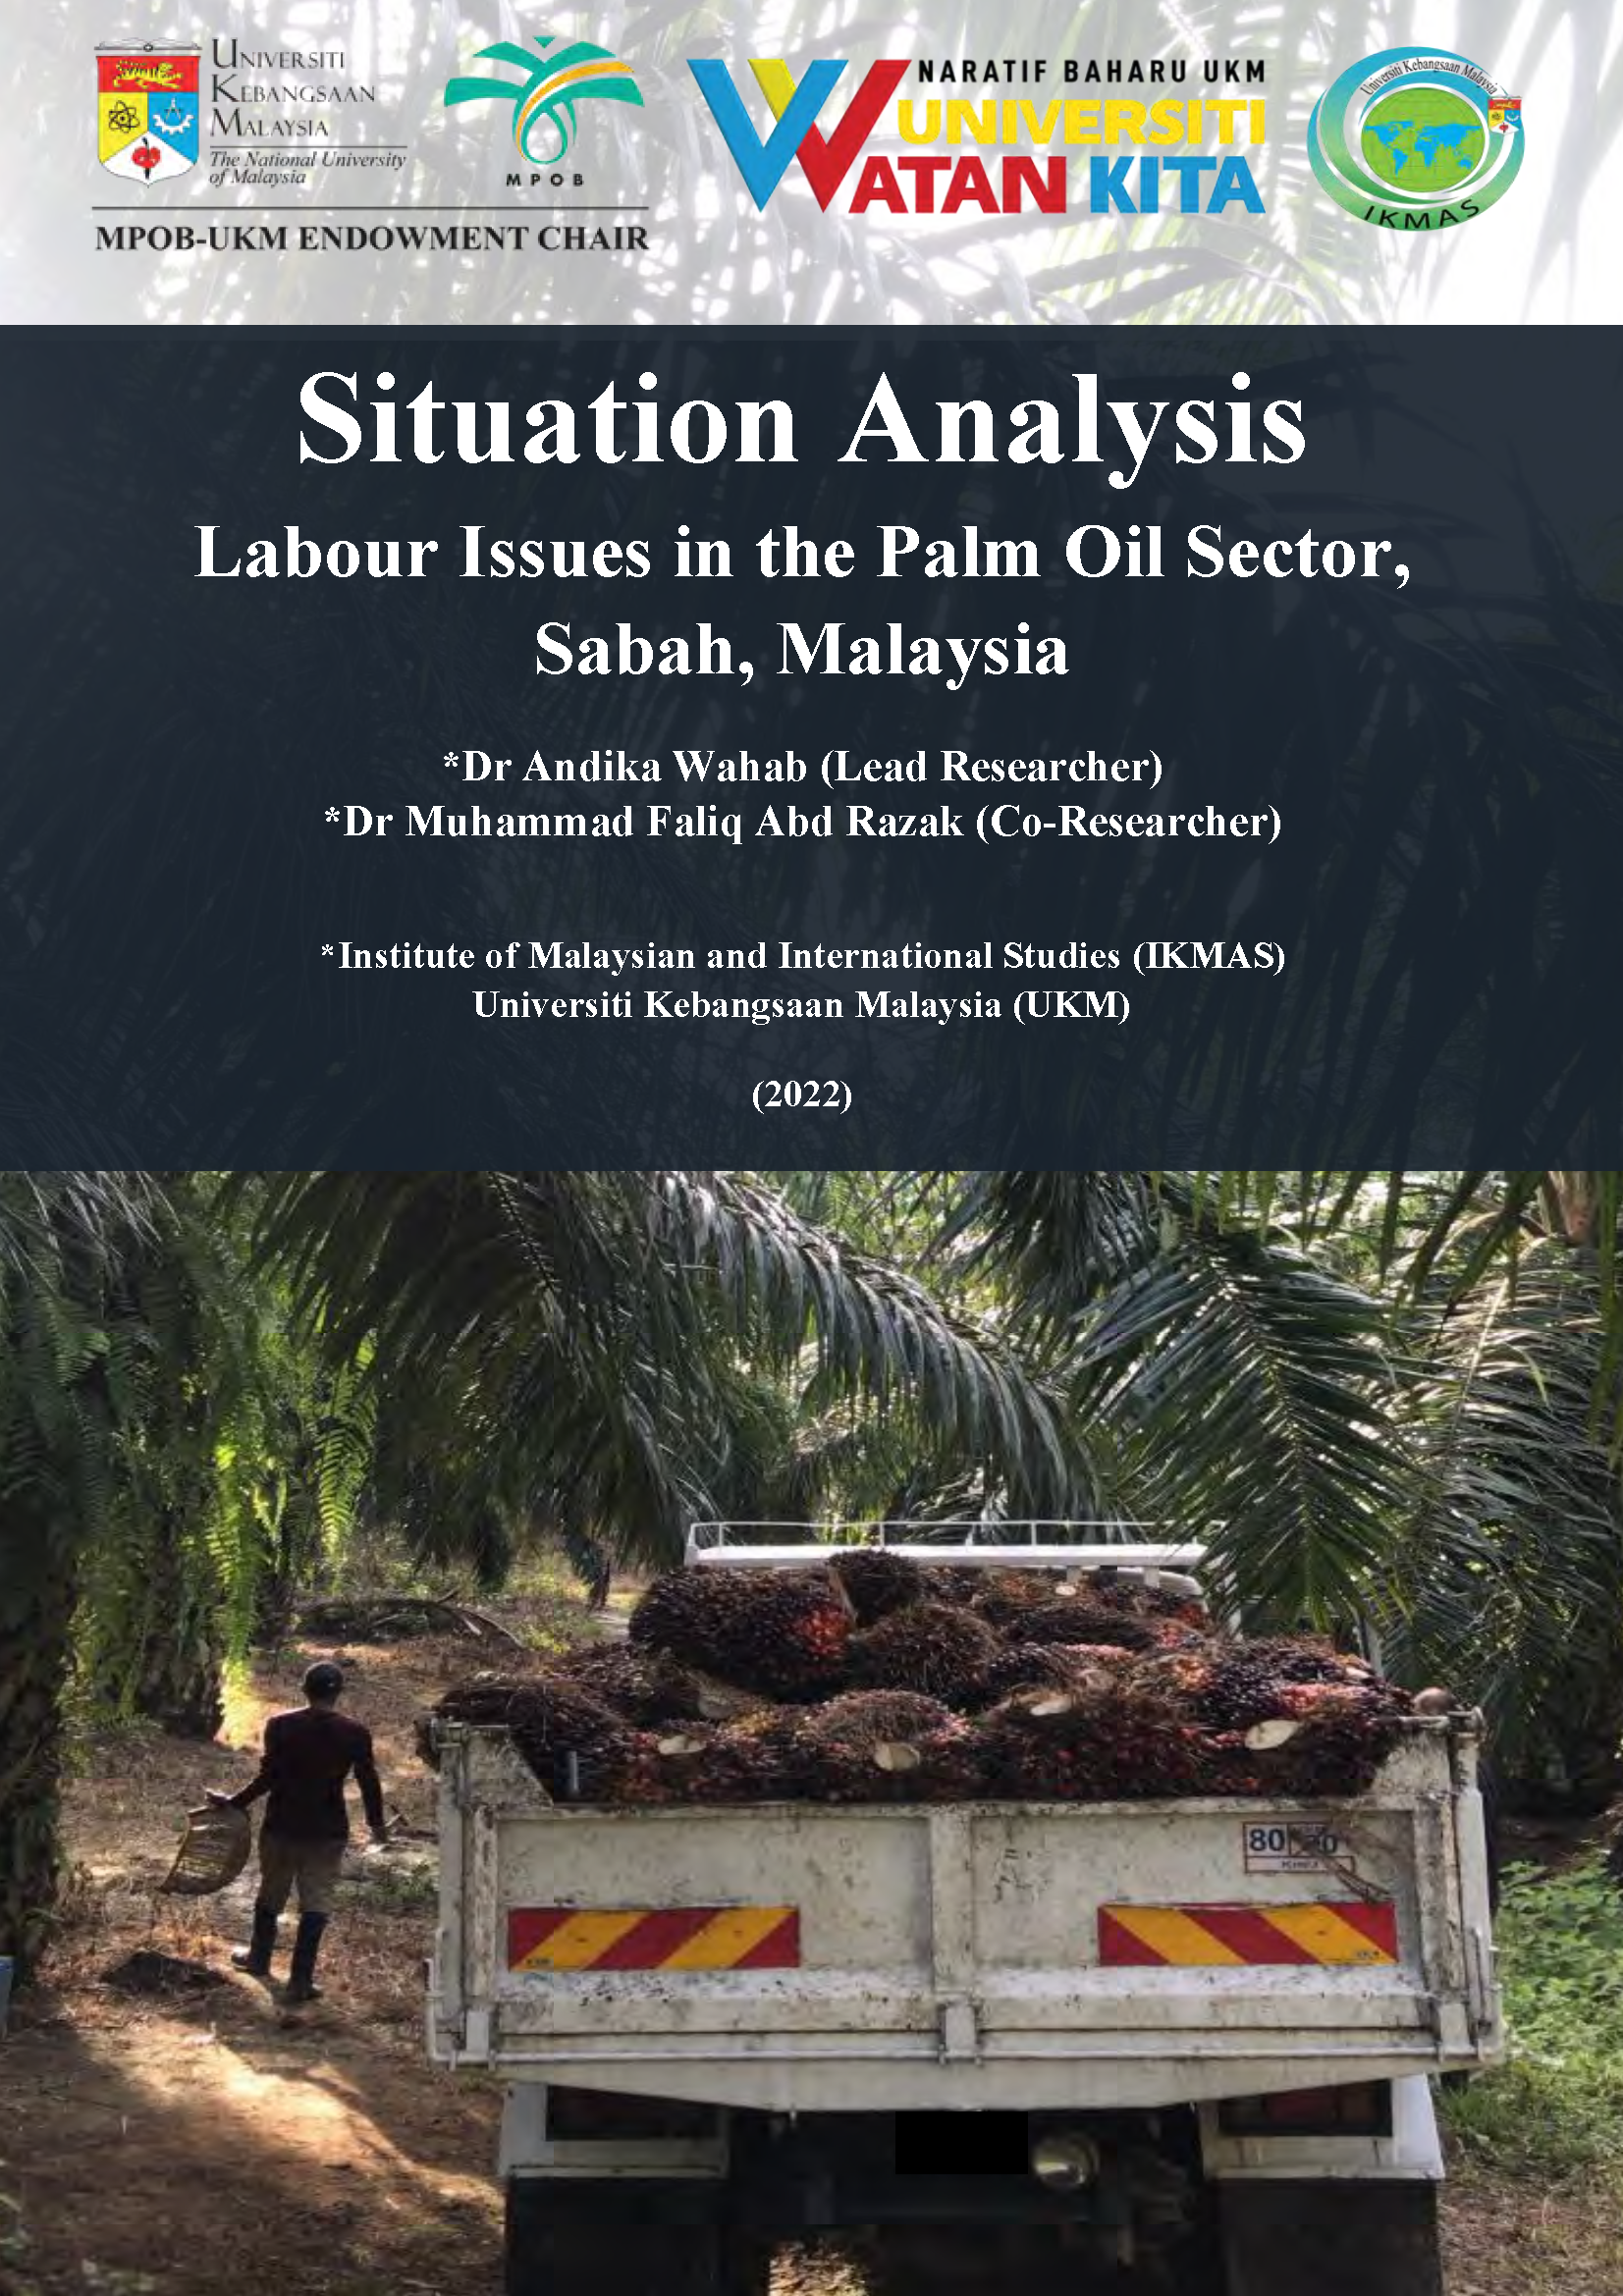 Situation Analysis: Labour Issues in the Palm Oil Sector, Sabah, Malaysia